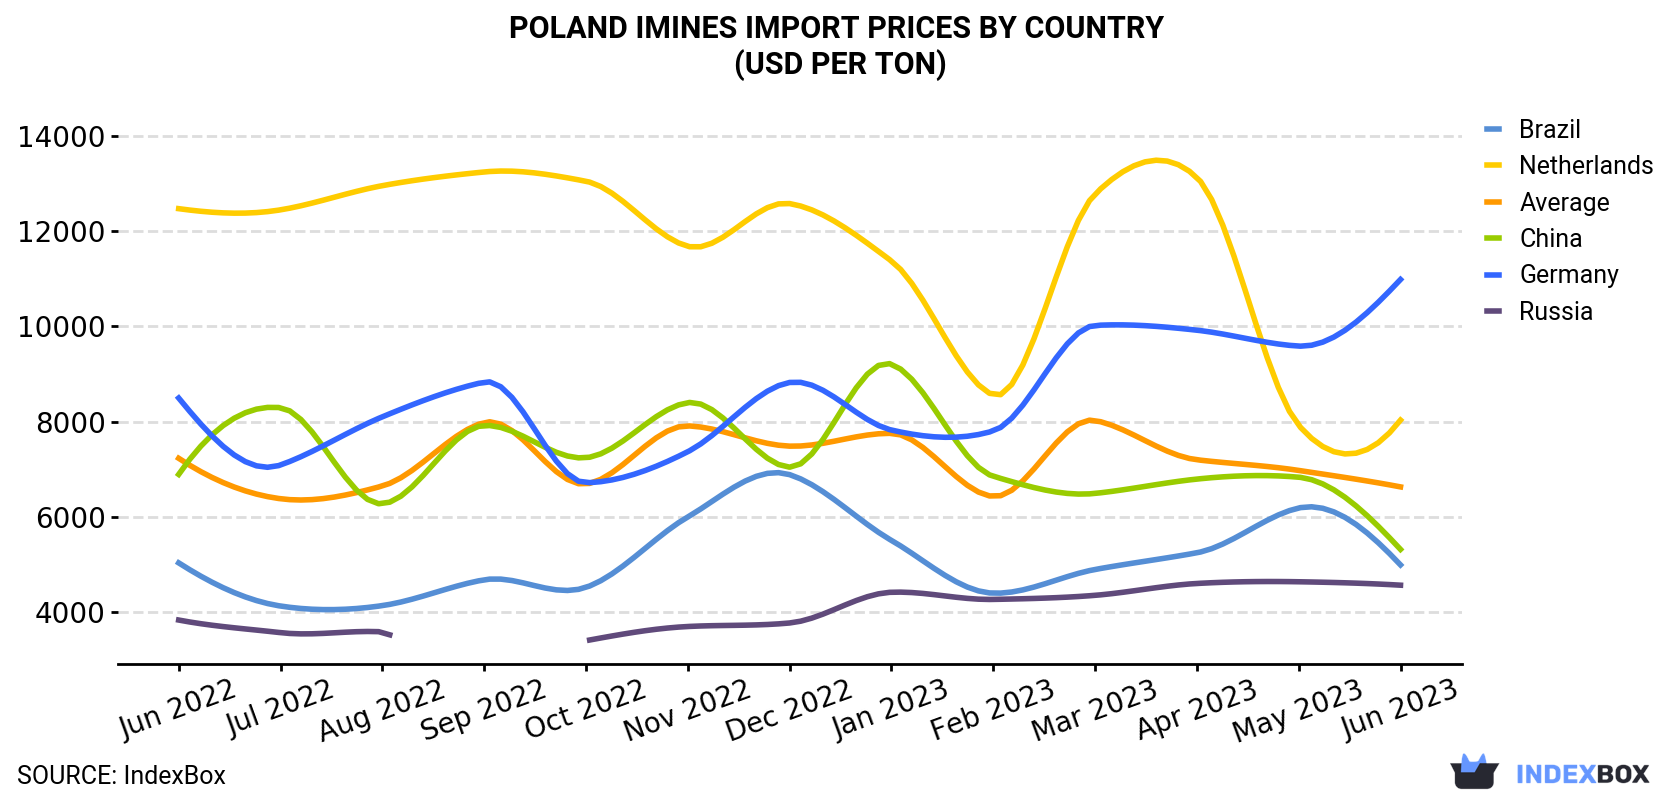 Poland Imines Import Prices By Country (USD Per Ton)